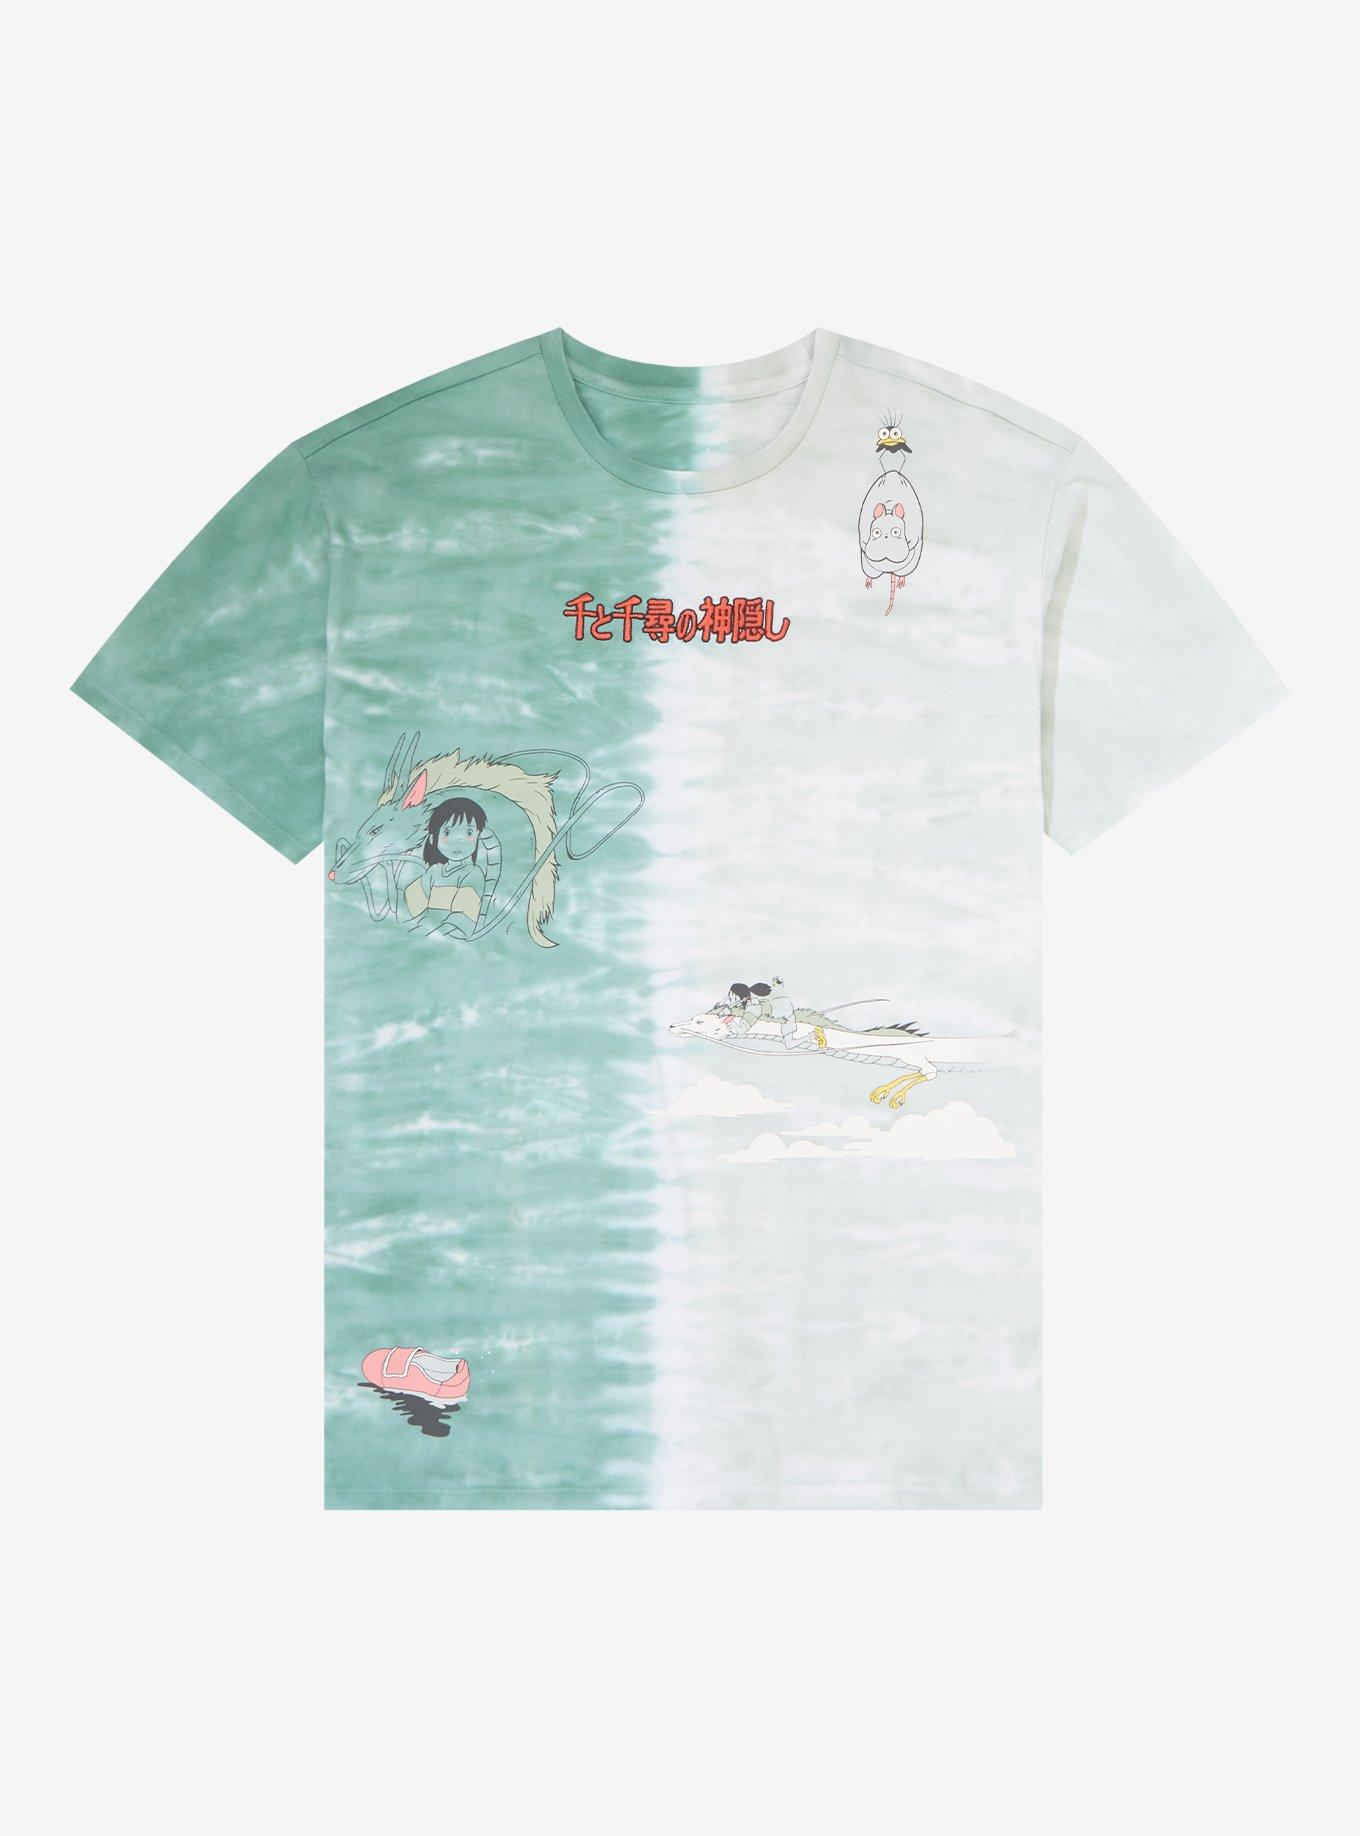 OFFICIAL Studio Ghibli Tees | BoxLunch Gifts